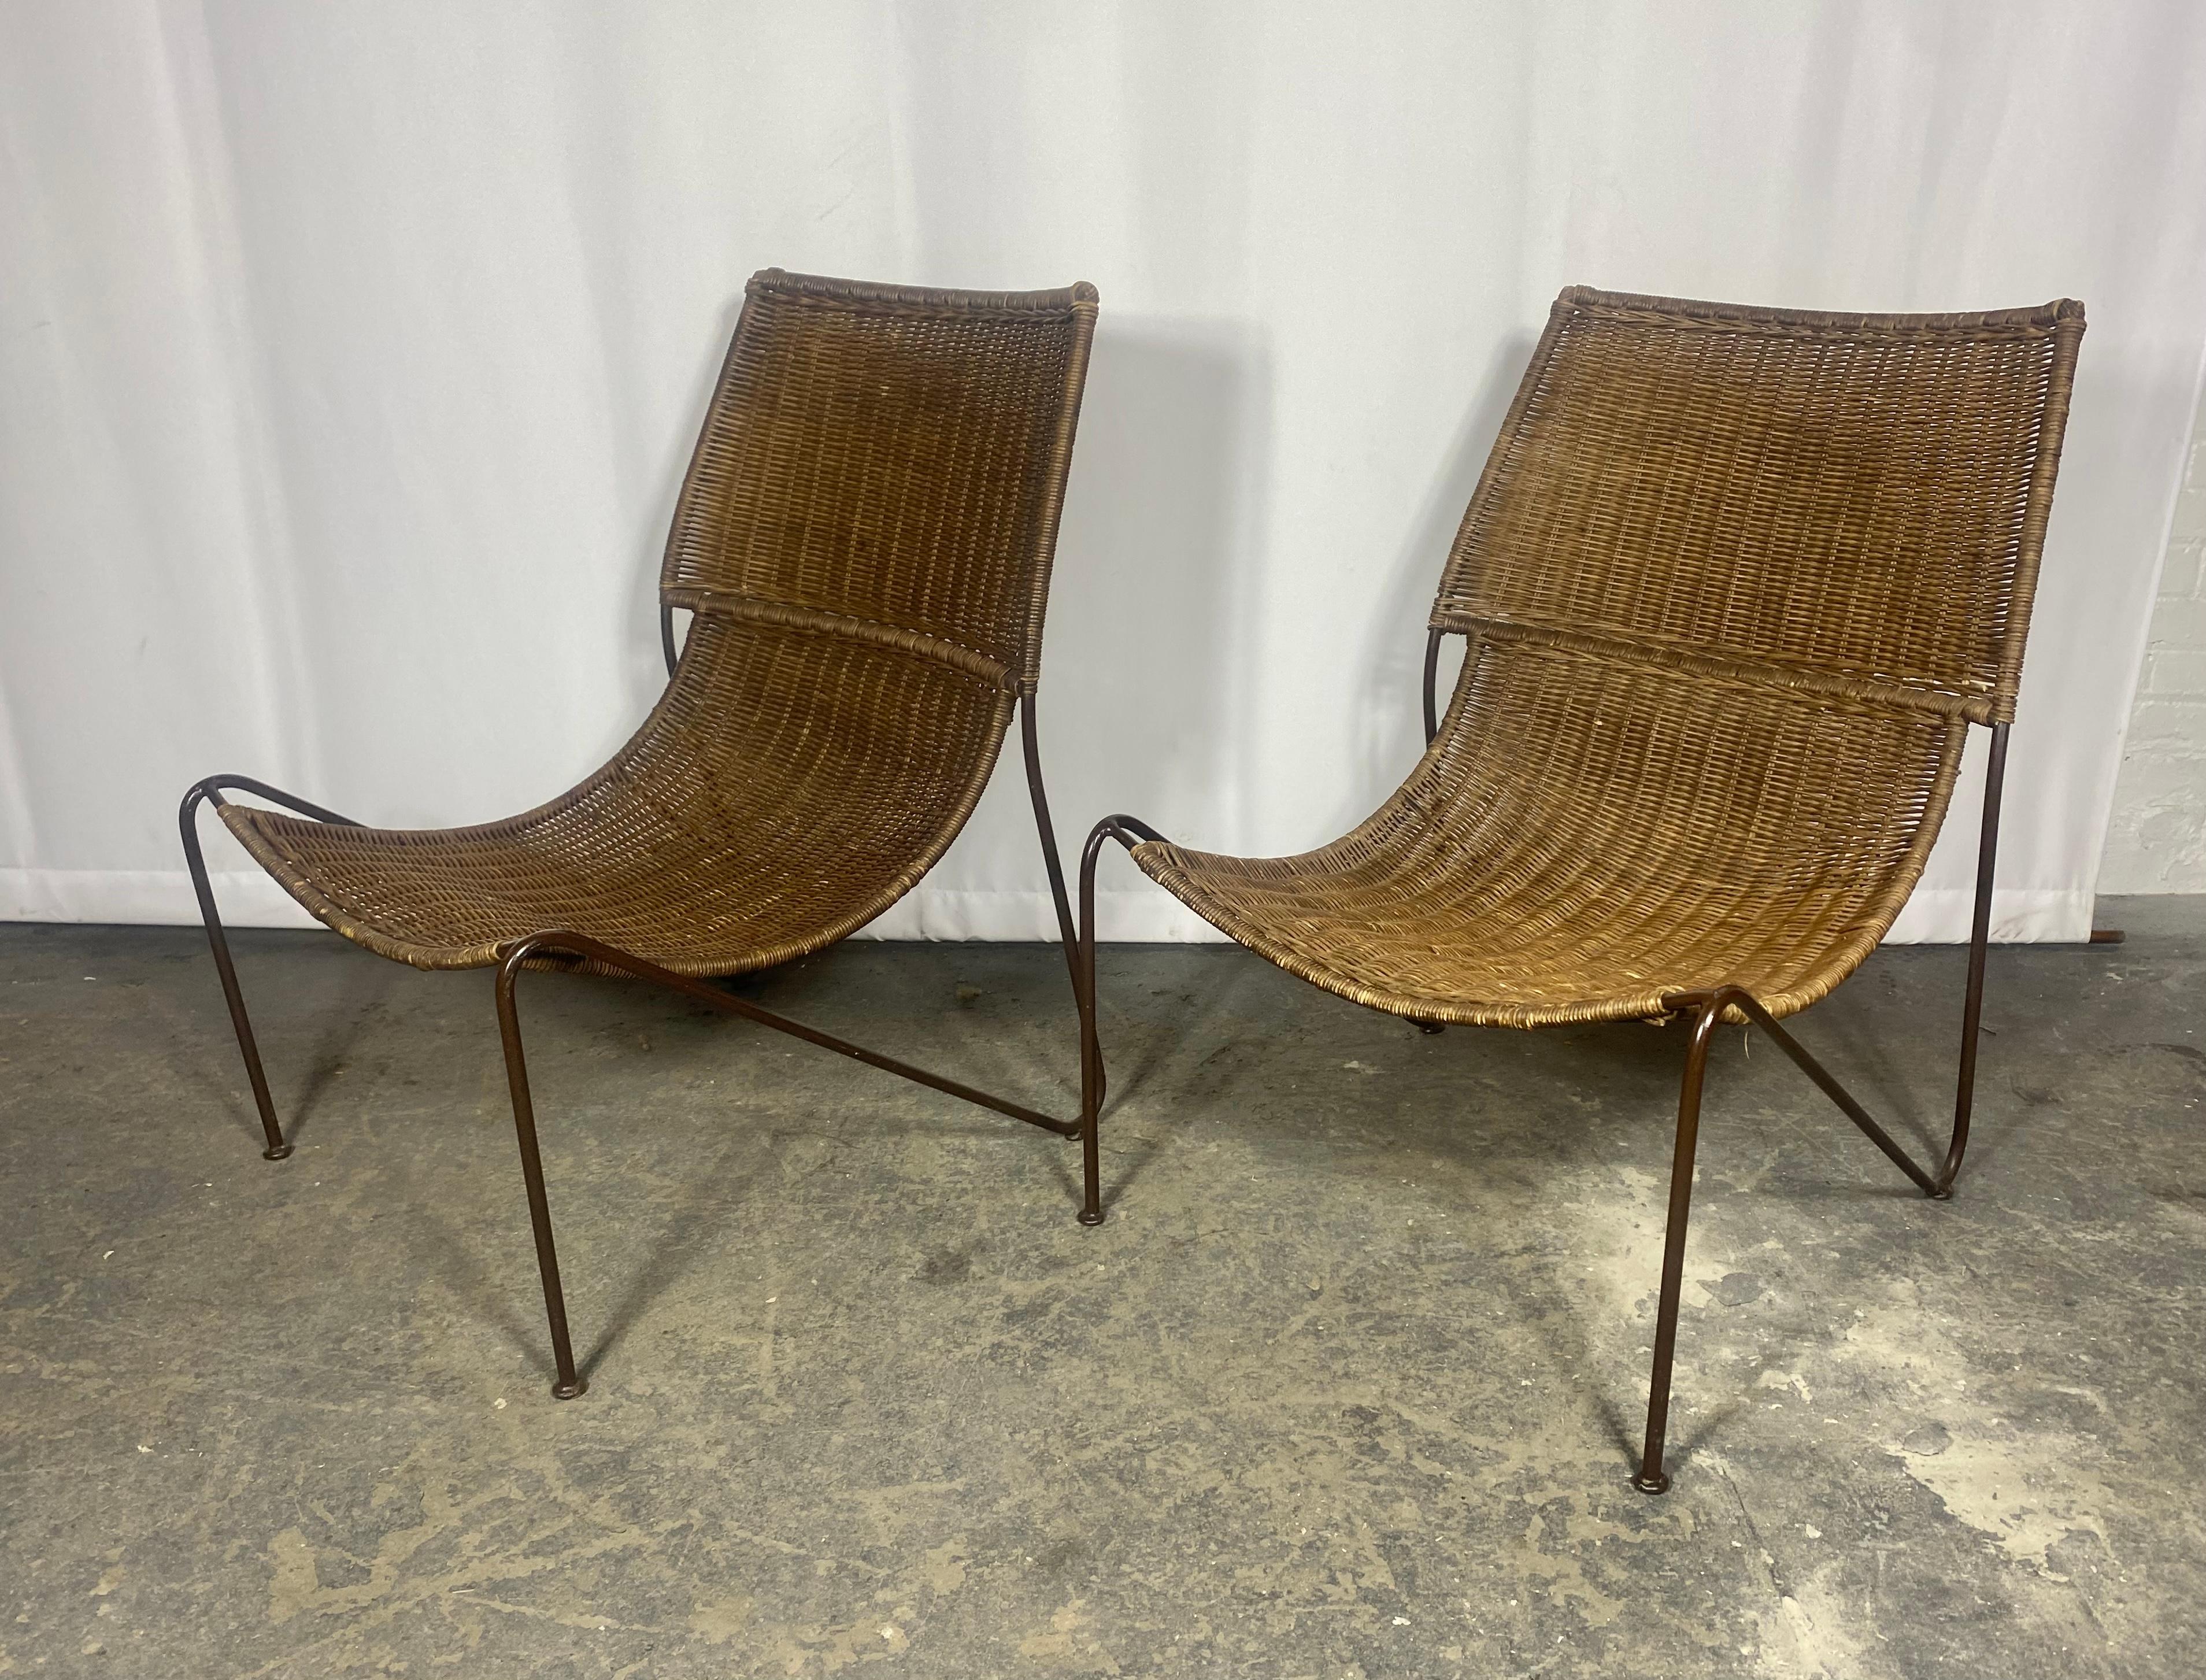 Classic Mid Century Modern Iron and Wicker Sling , lounge chairs .Weinberg Style In Good Condition For Sale In Buffalo, NY